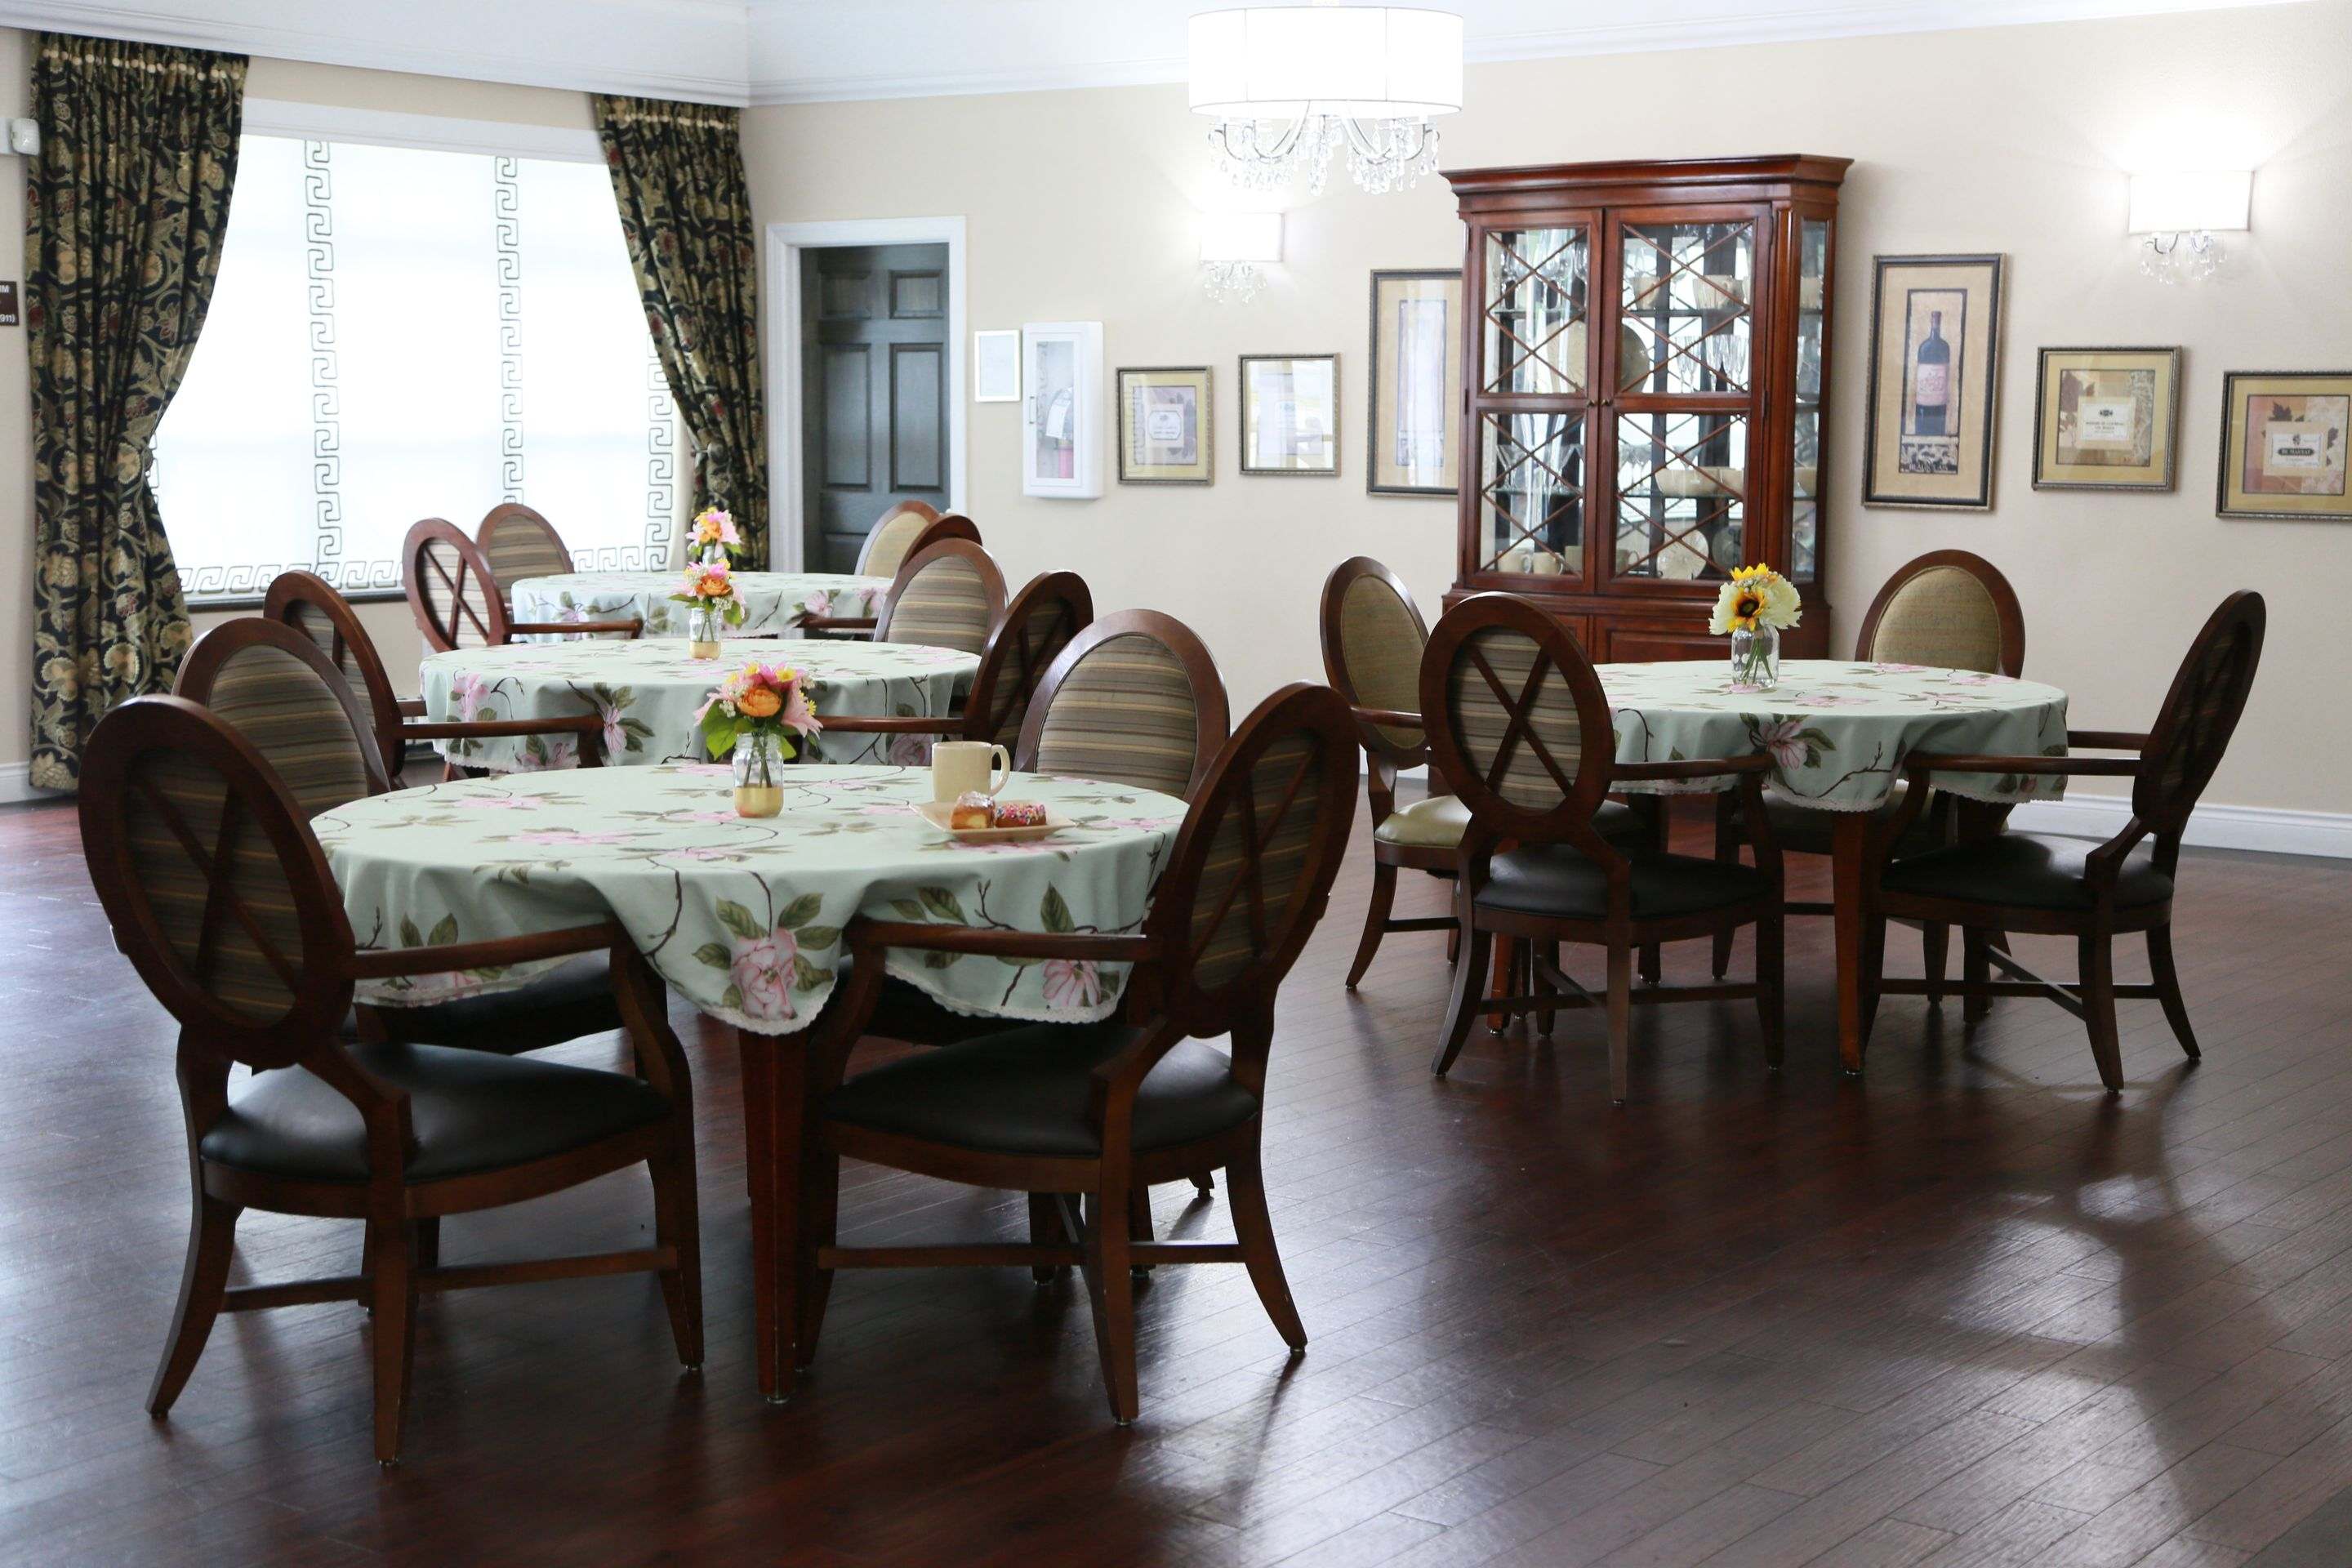 The Brook of Grayling dining area for residents